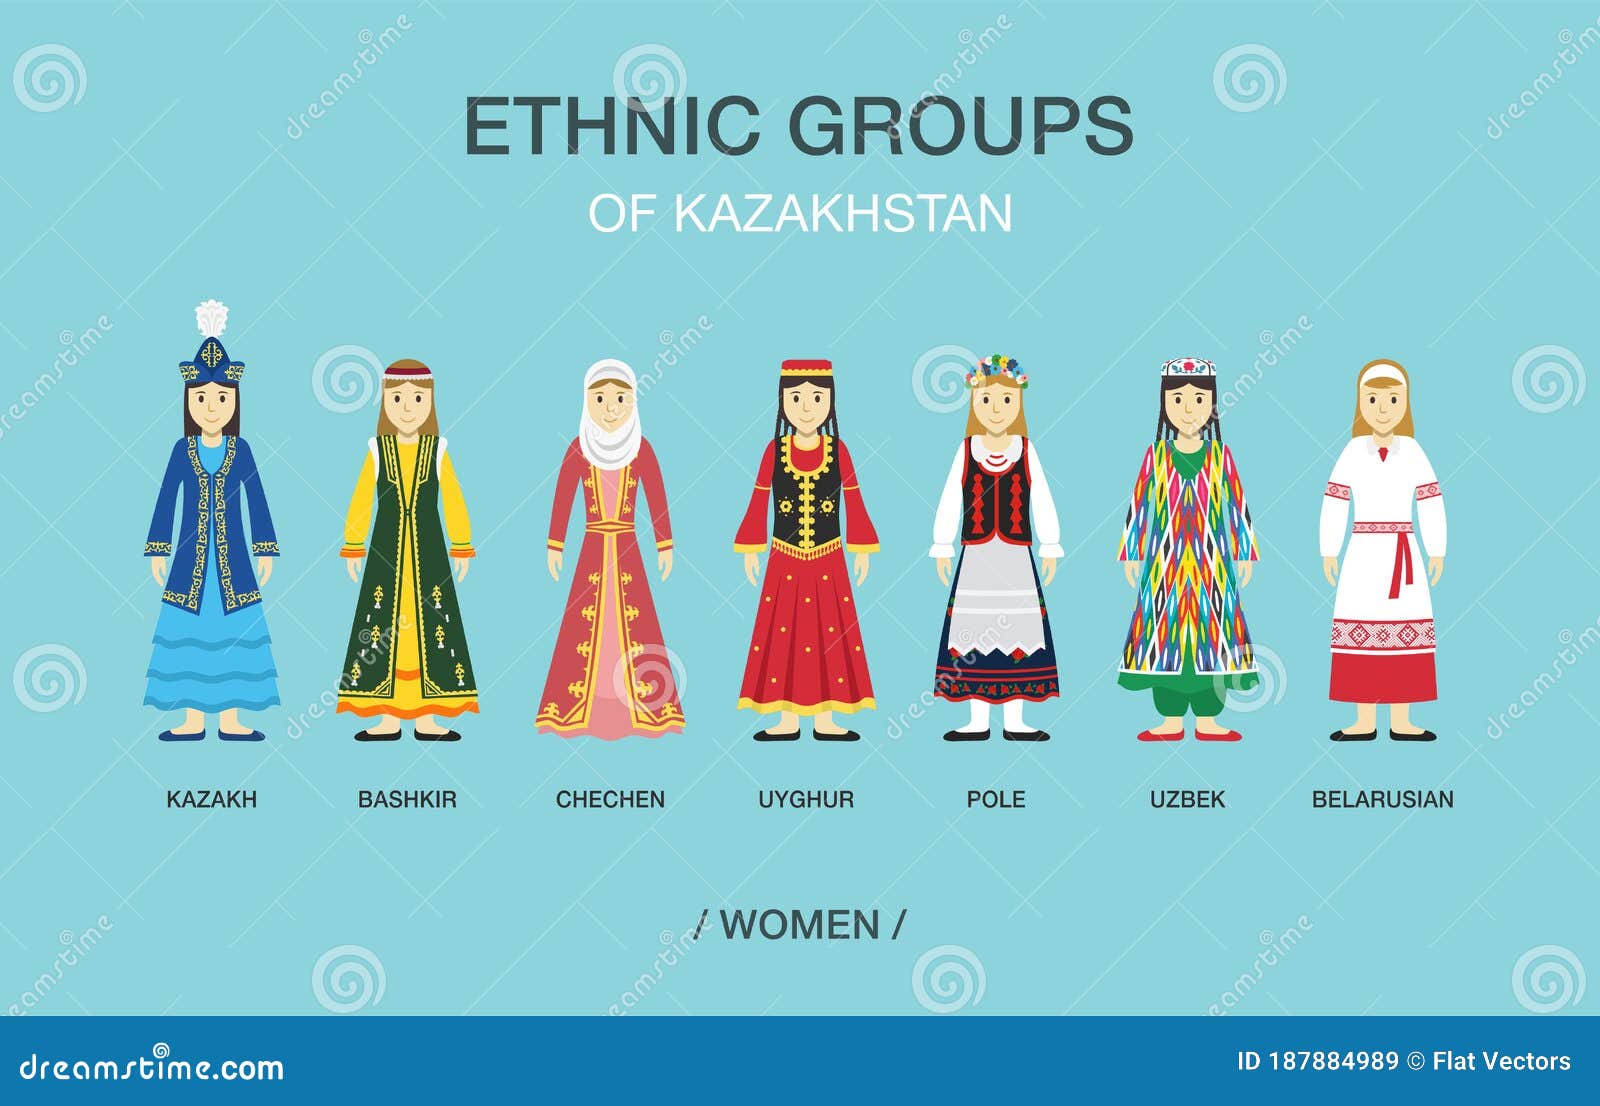 ethnic groups of kazakhstan. women in traditional costume or dress.